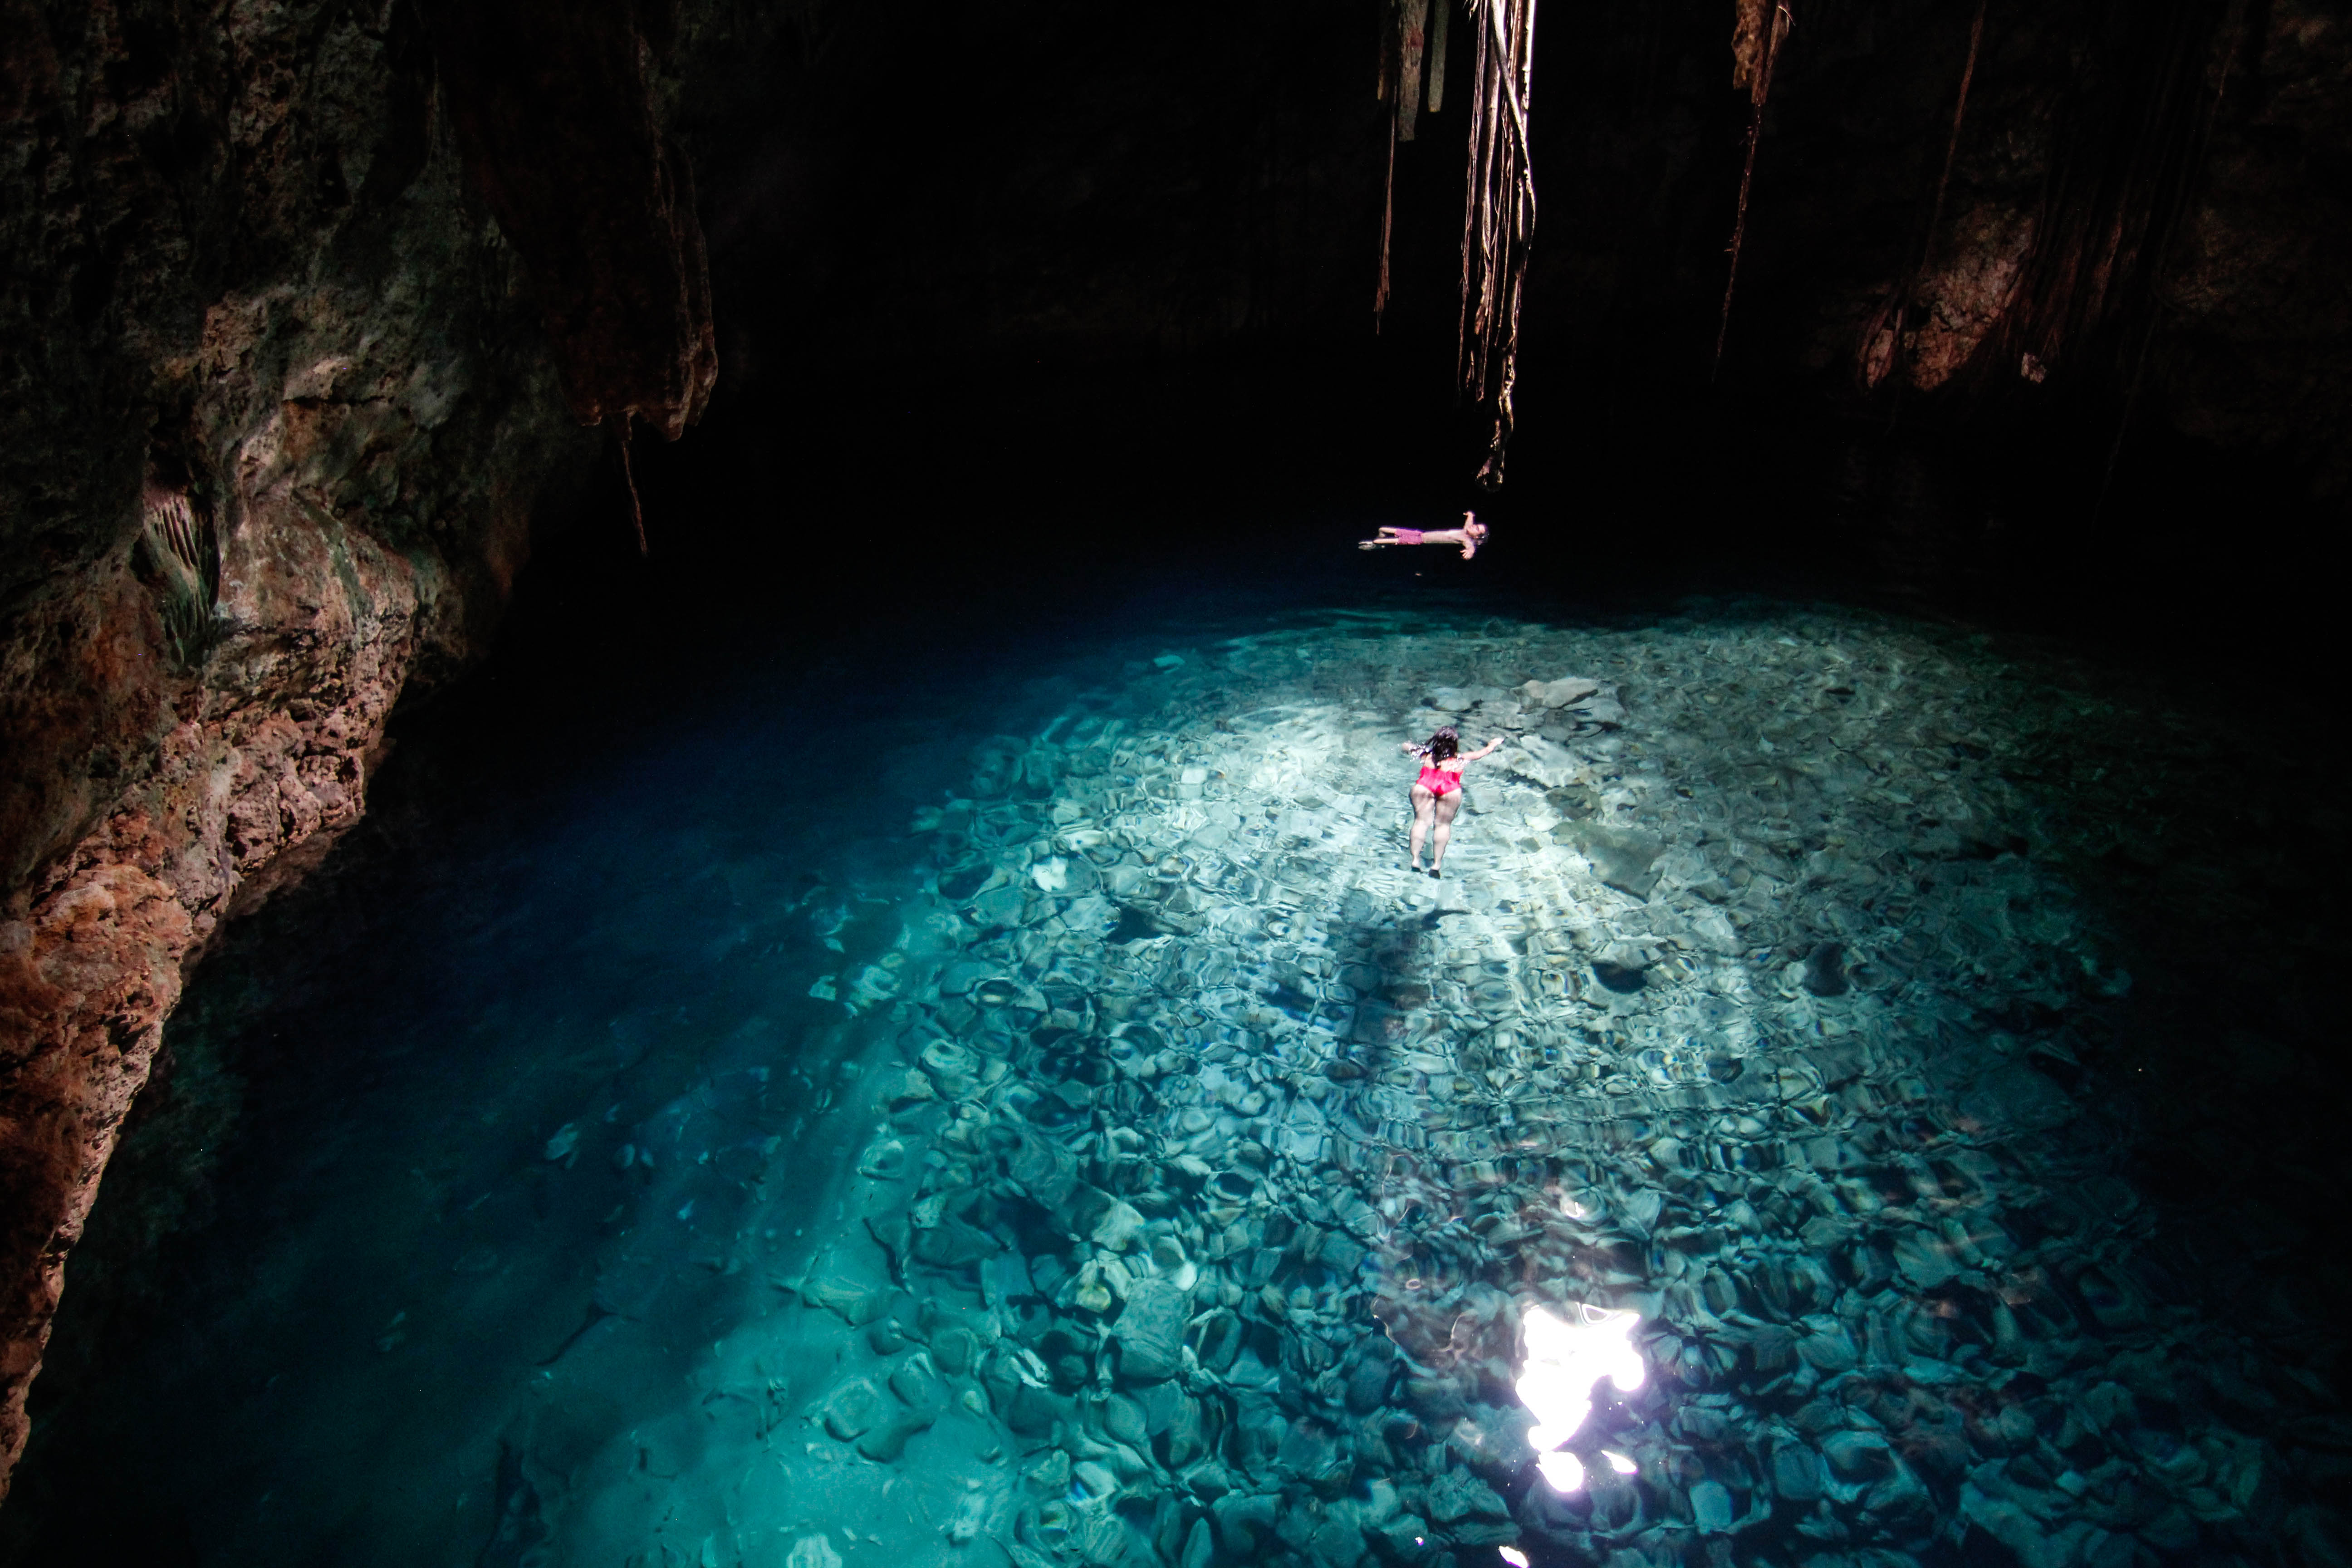 In the peninsula of Yucatan there are more than seven thousand natural freshwater pools, called cenotes. This one is in Cuzama. For the Maya, the cenotes were considered sources of life and sacred places to reunite with the Gods. In the photo a woman and a man swim and relax in the cenote.